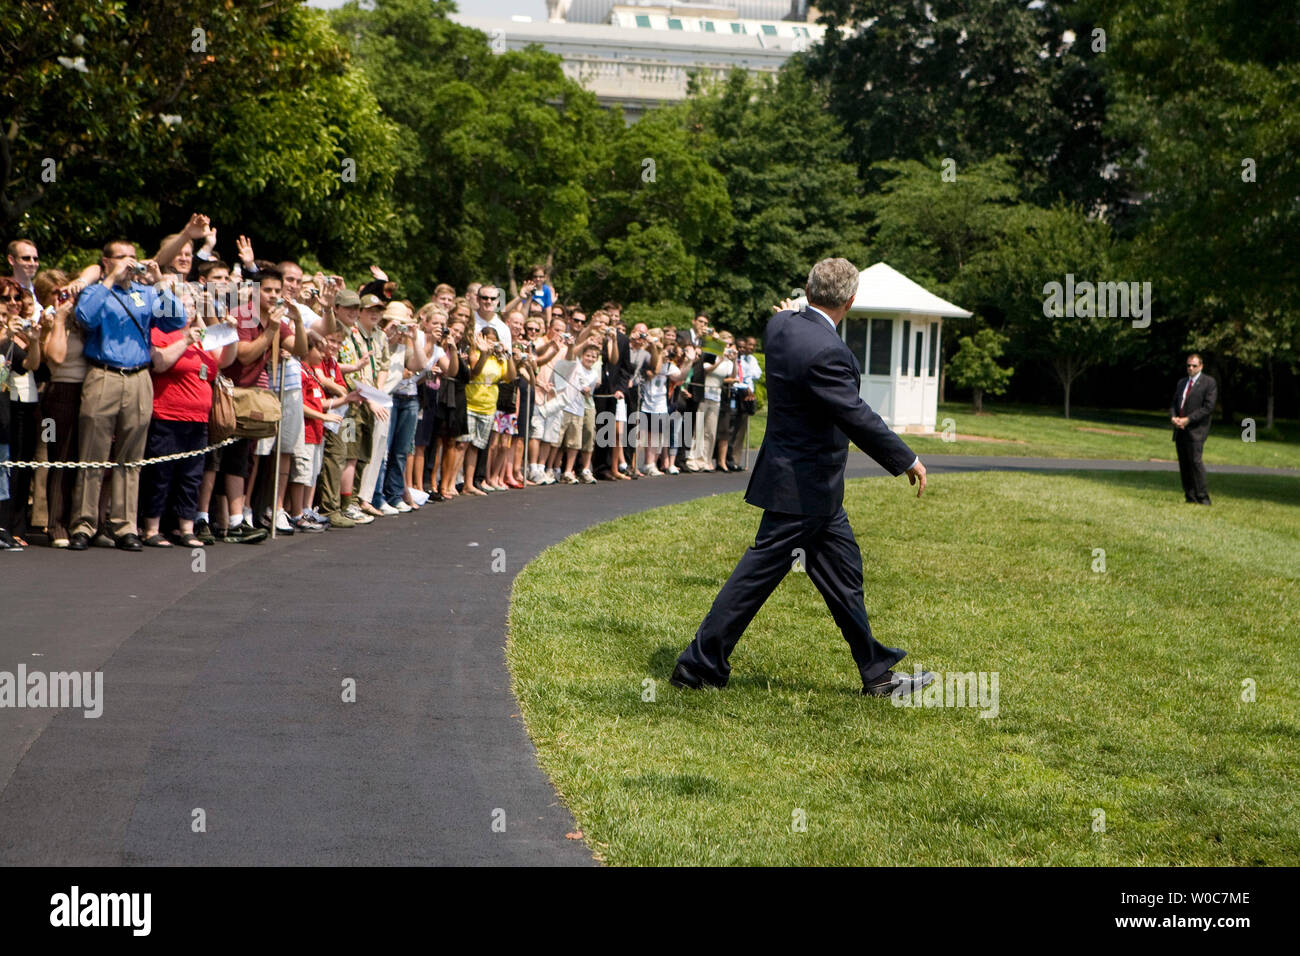 U.S. President George W. Bush waves to members of the public as he walks on the South Lawn of the White House toward Marine One in Washington on June 6, 2008. President Bush is going to Camp David for the weekend. (UPI Photo/Patrick D. McDermott) Stock Photo